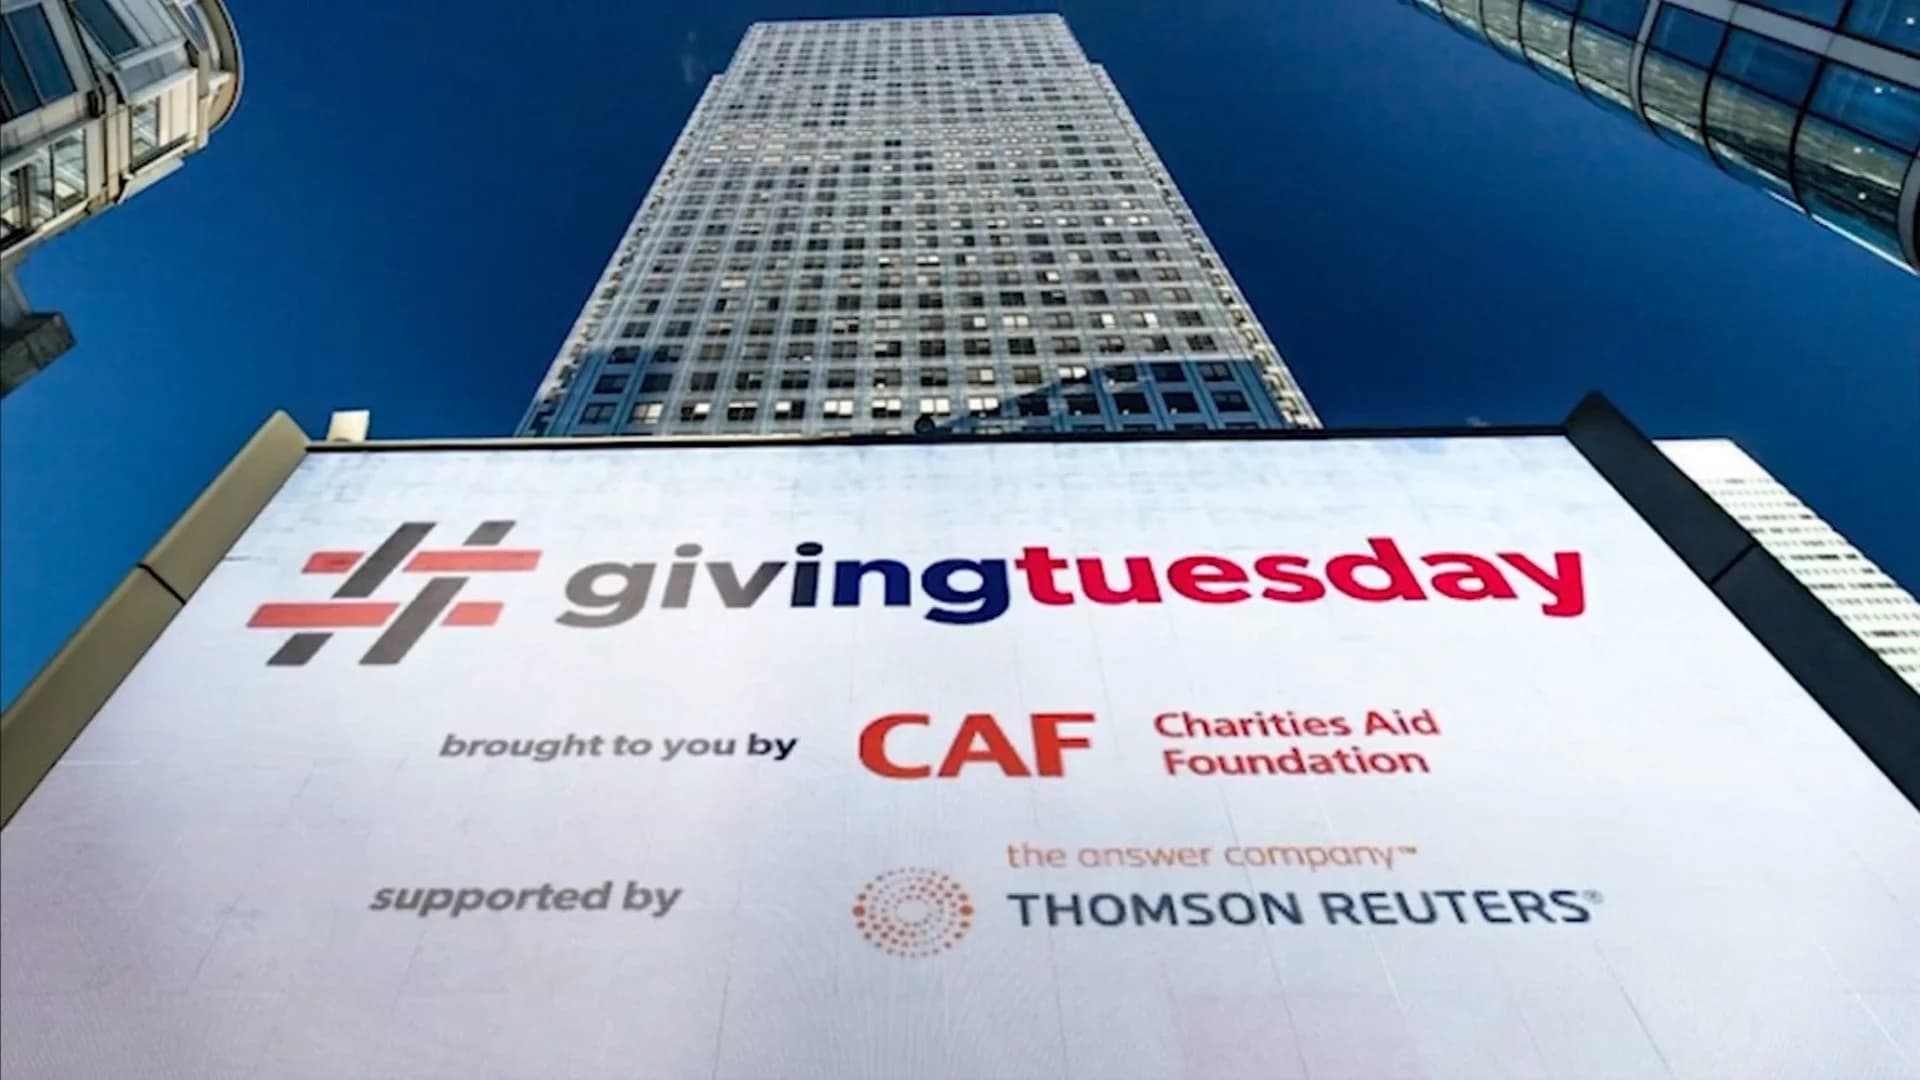 Organizers: Best way to get involved on Giving Tuesday is staying local